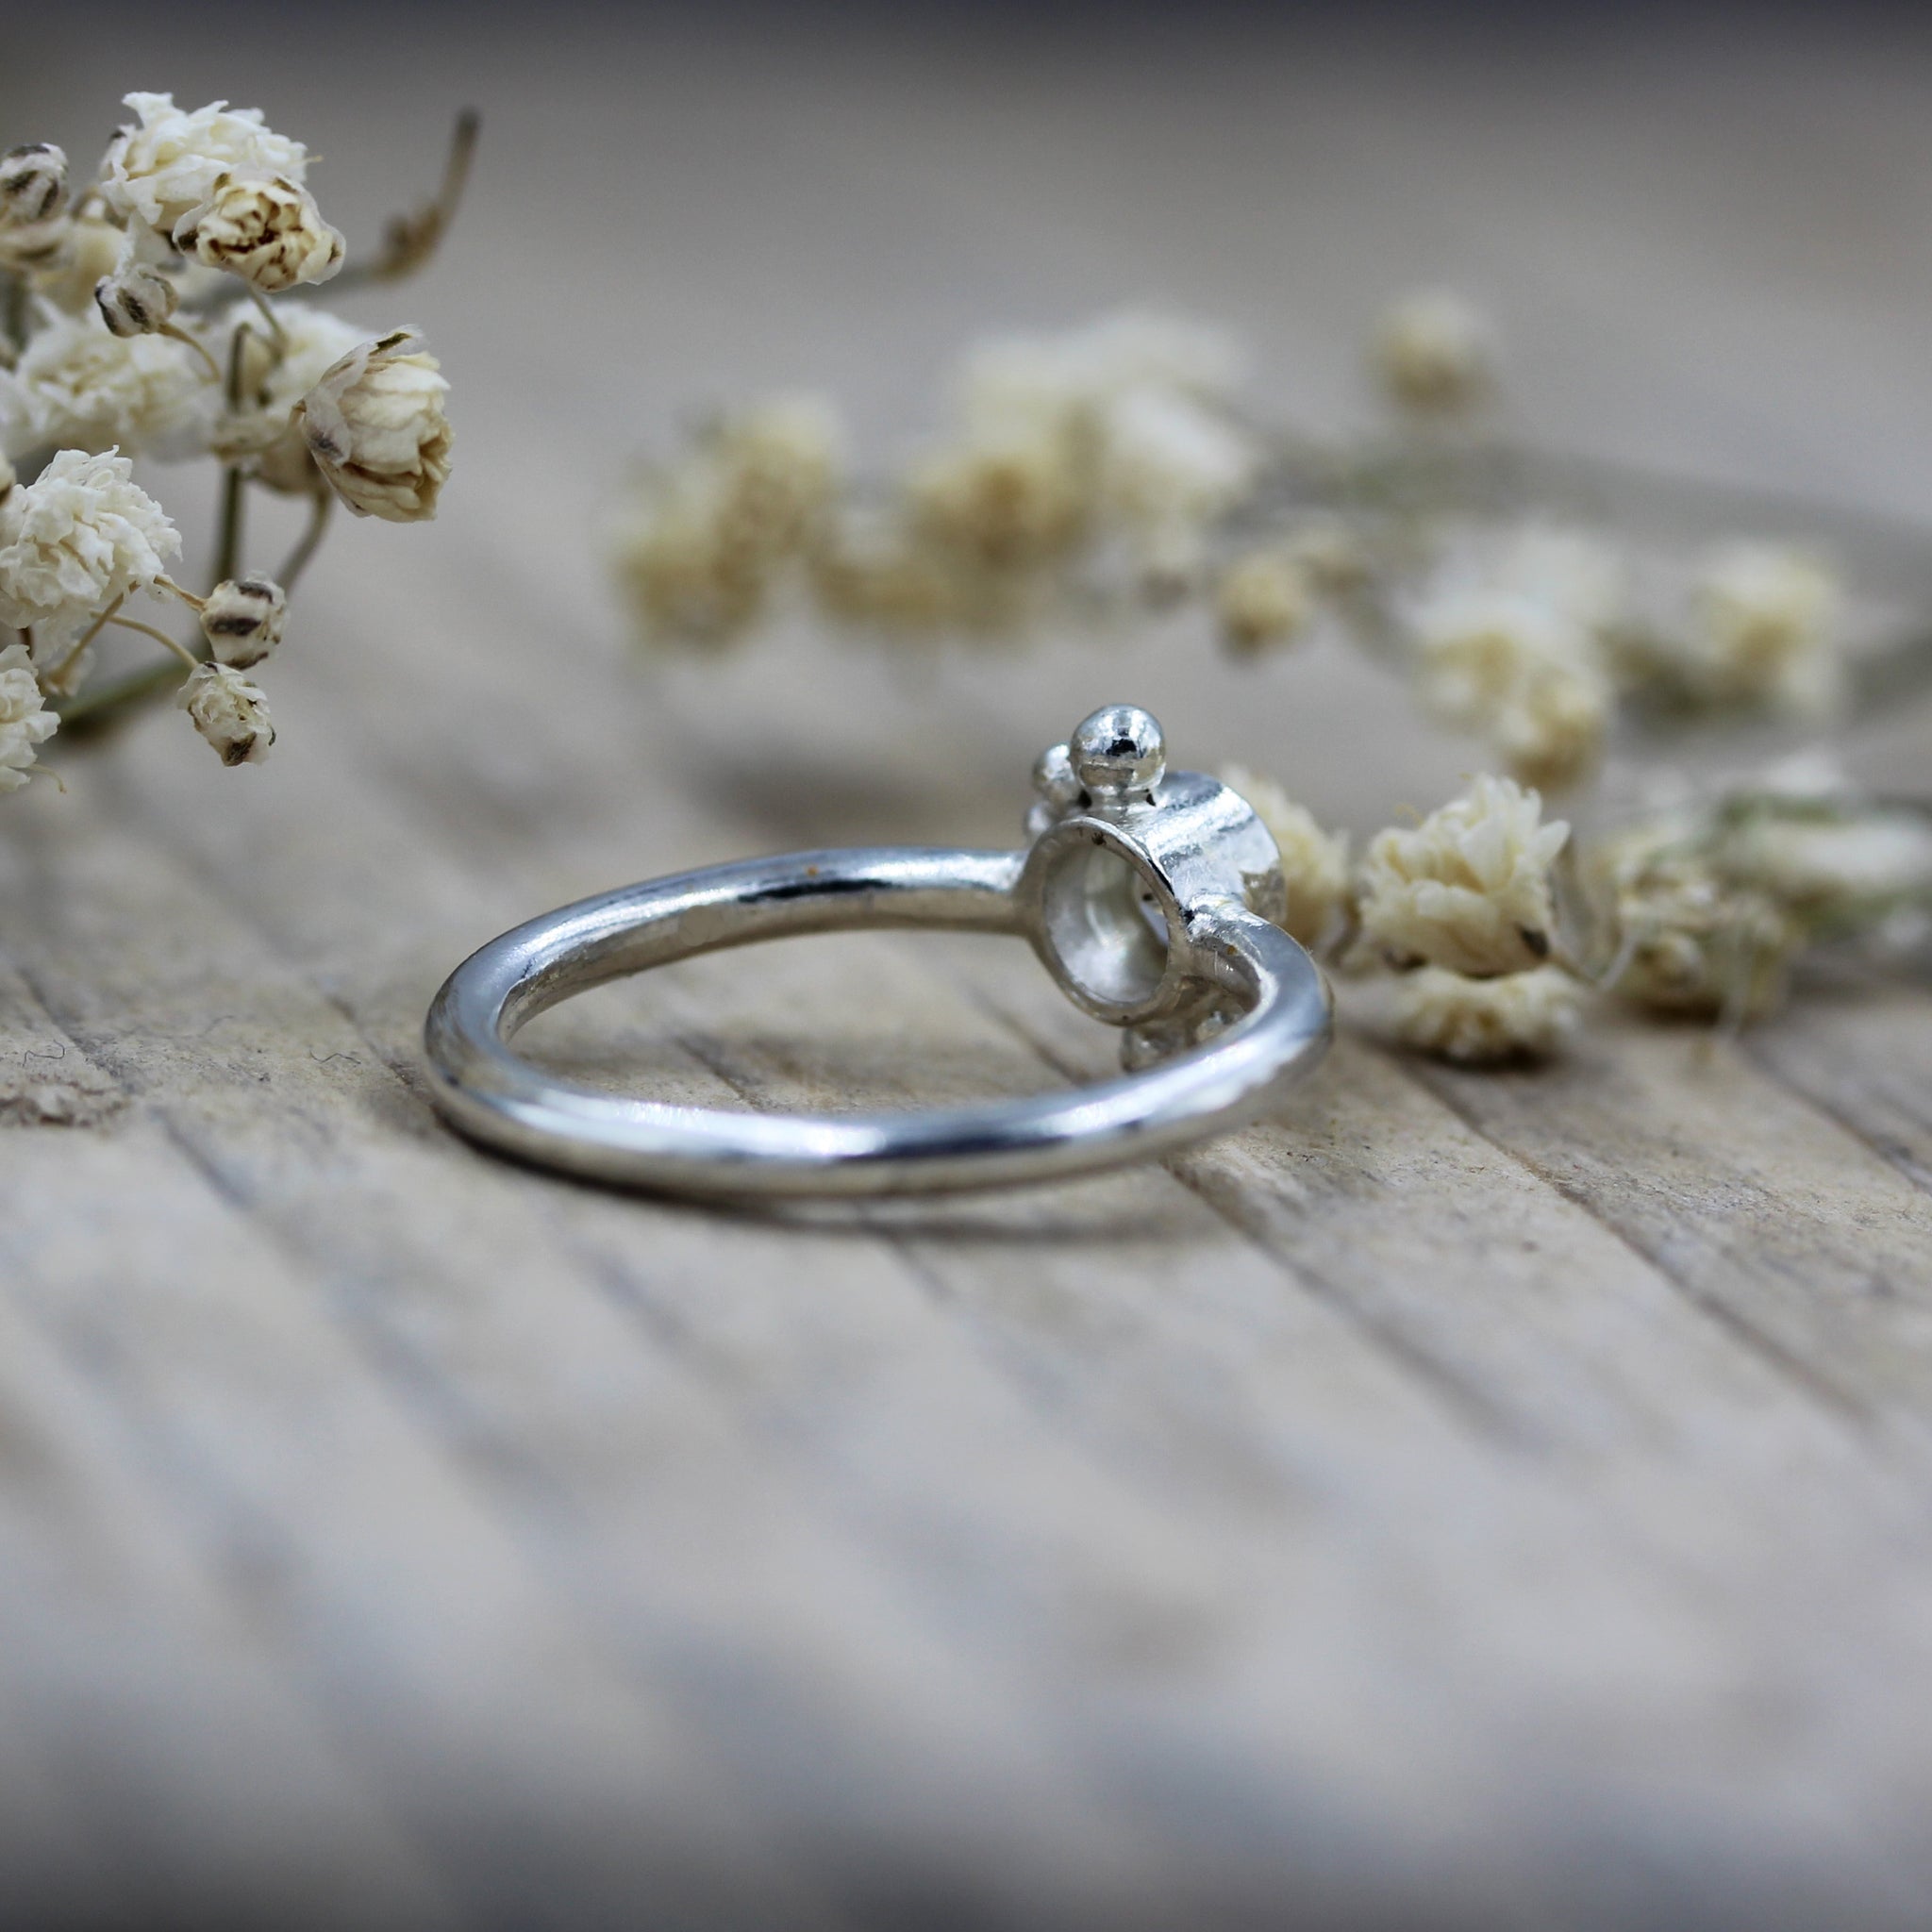 Harmony ring, handmade sea inspired ring in recycled silver and white topaz